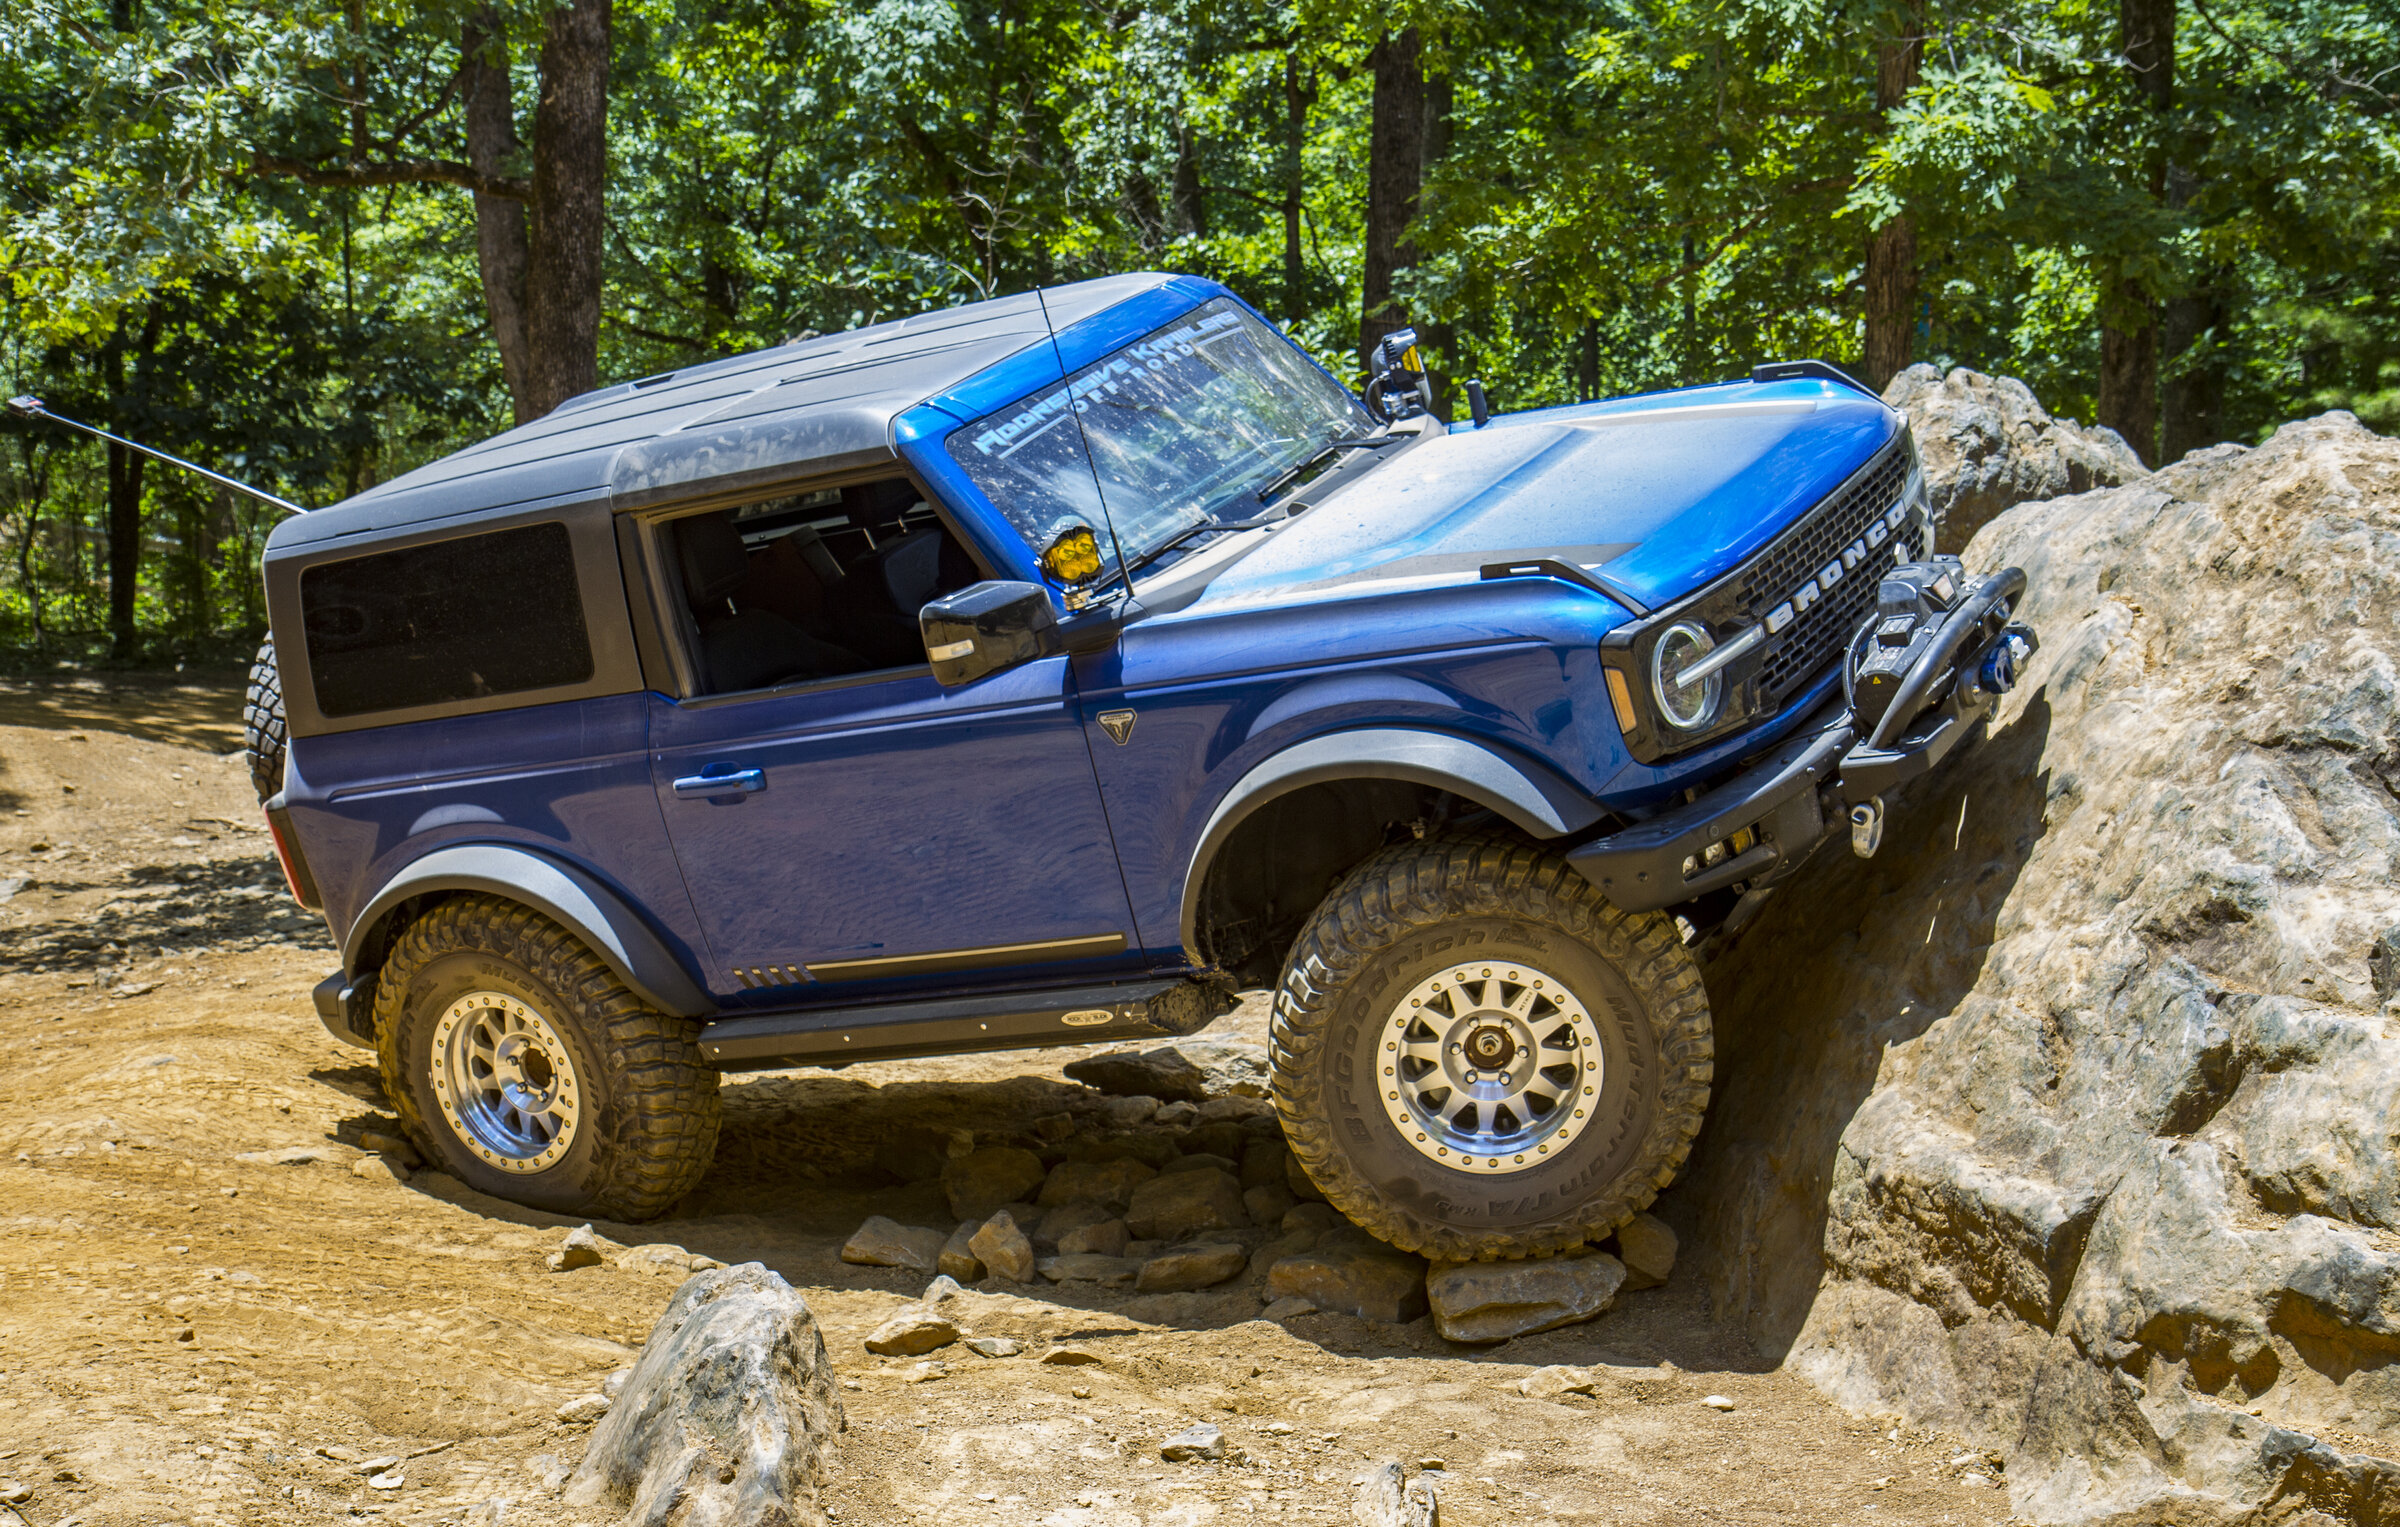 Ford Bronco Biggest Bronco day at Uwharrie National Forest yet 20220604 Uwharrie Trip w Carolina Bronco Club 7D 01 LR